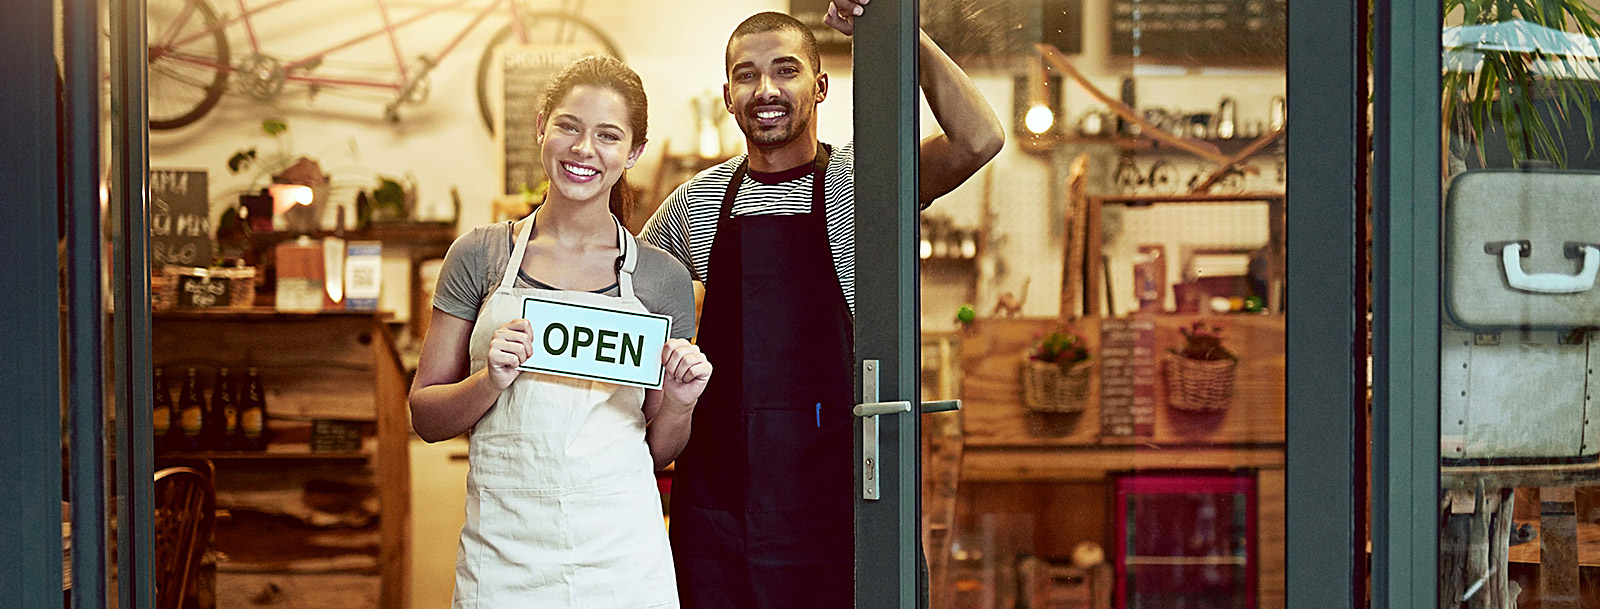 man and woman standing in doorway of new business